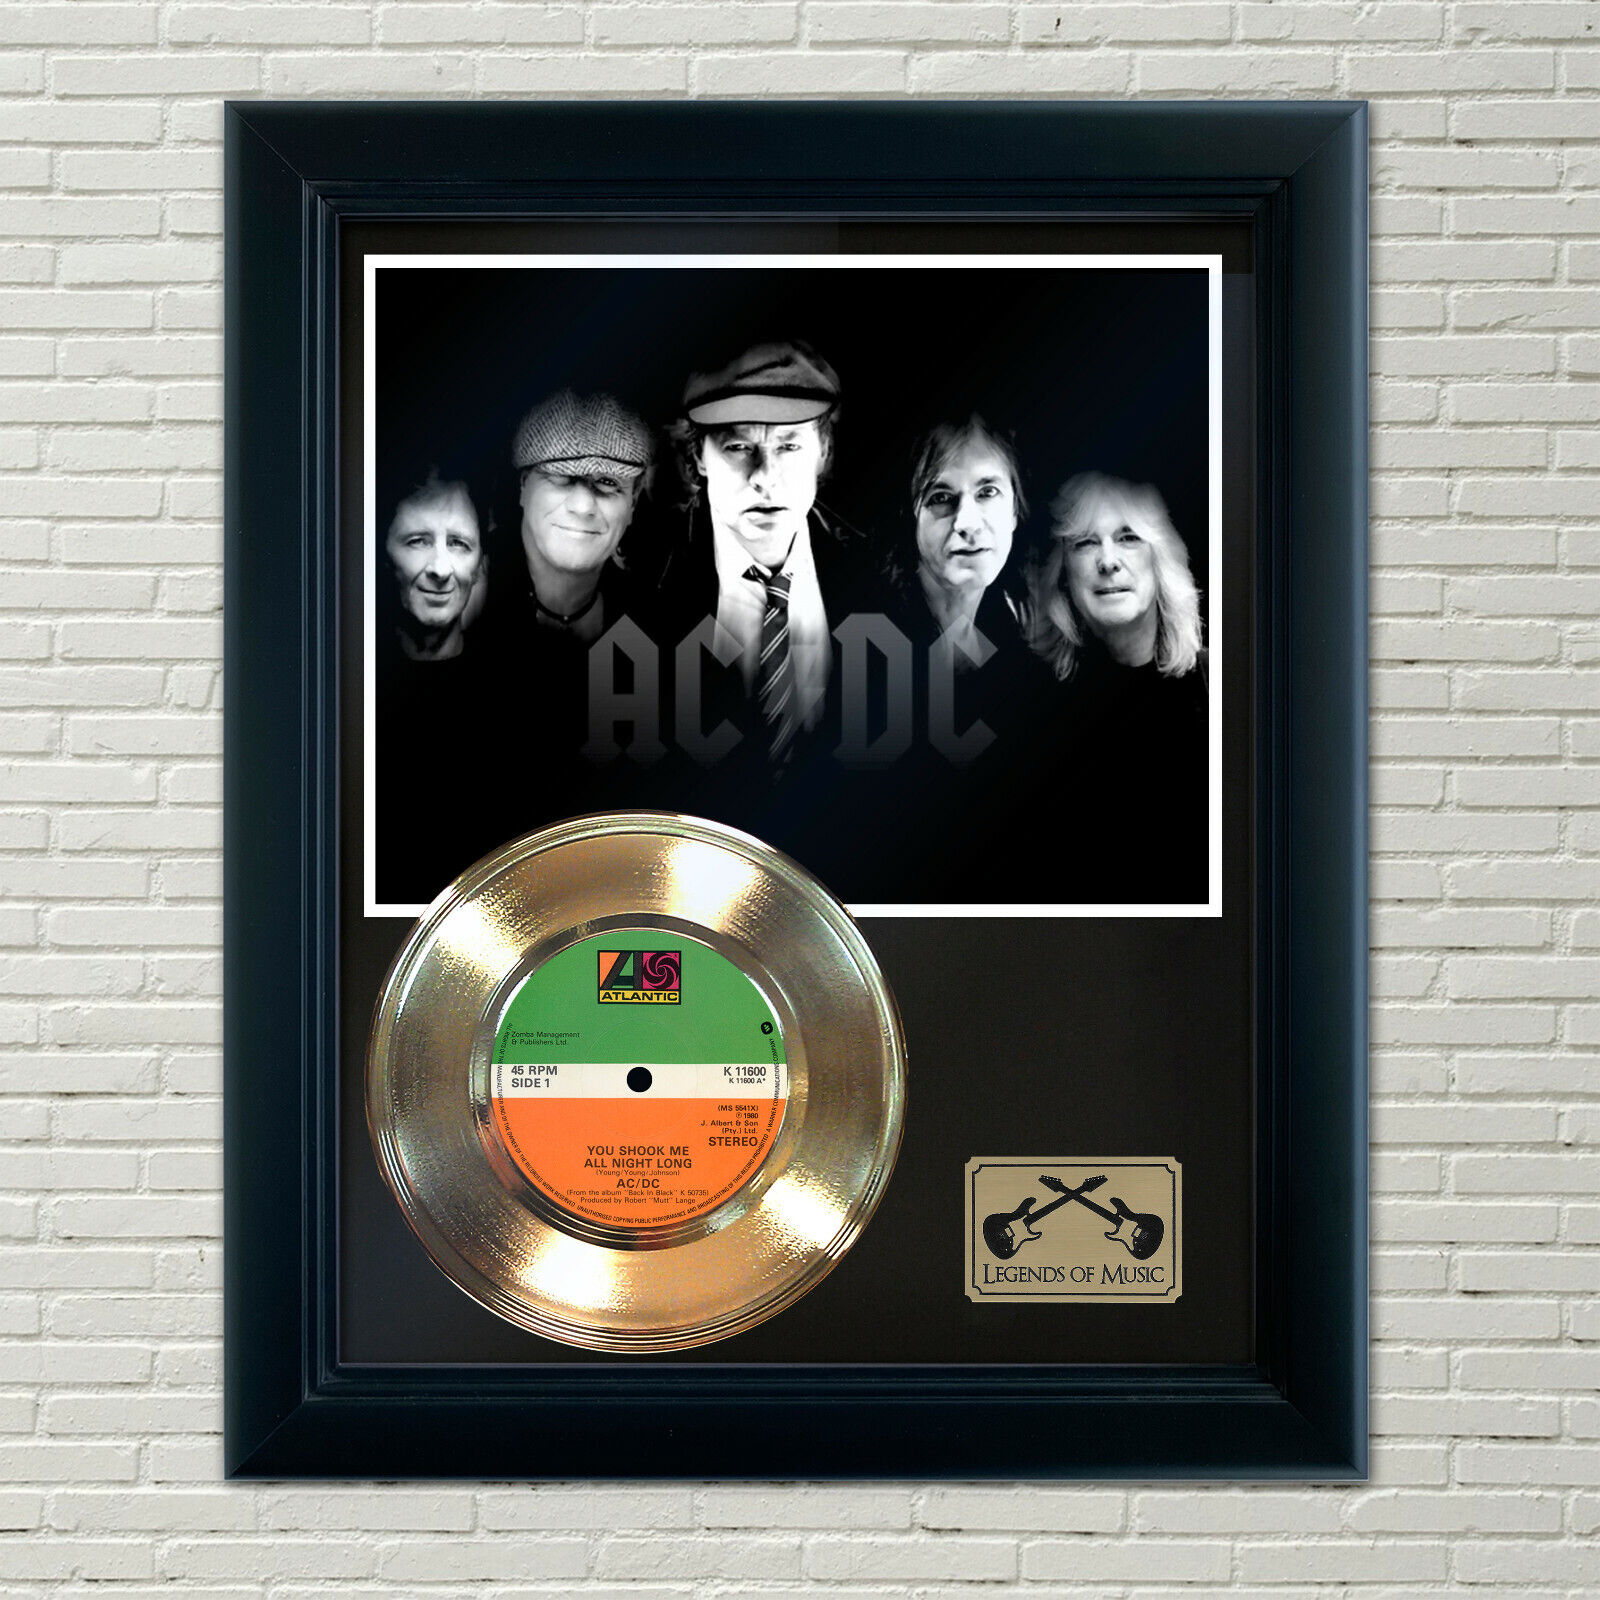 AC/DC "You Shook Me All Night Long" Framed Record Display